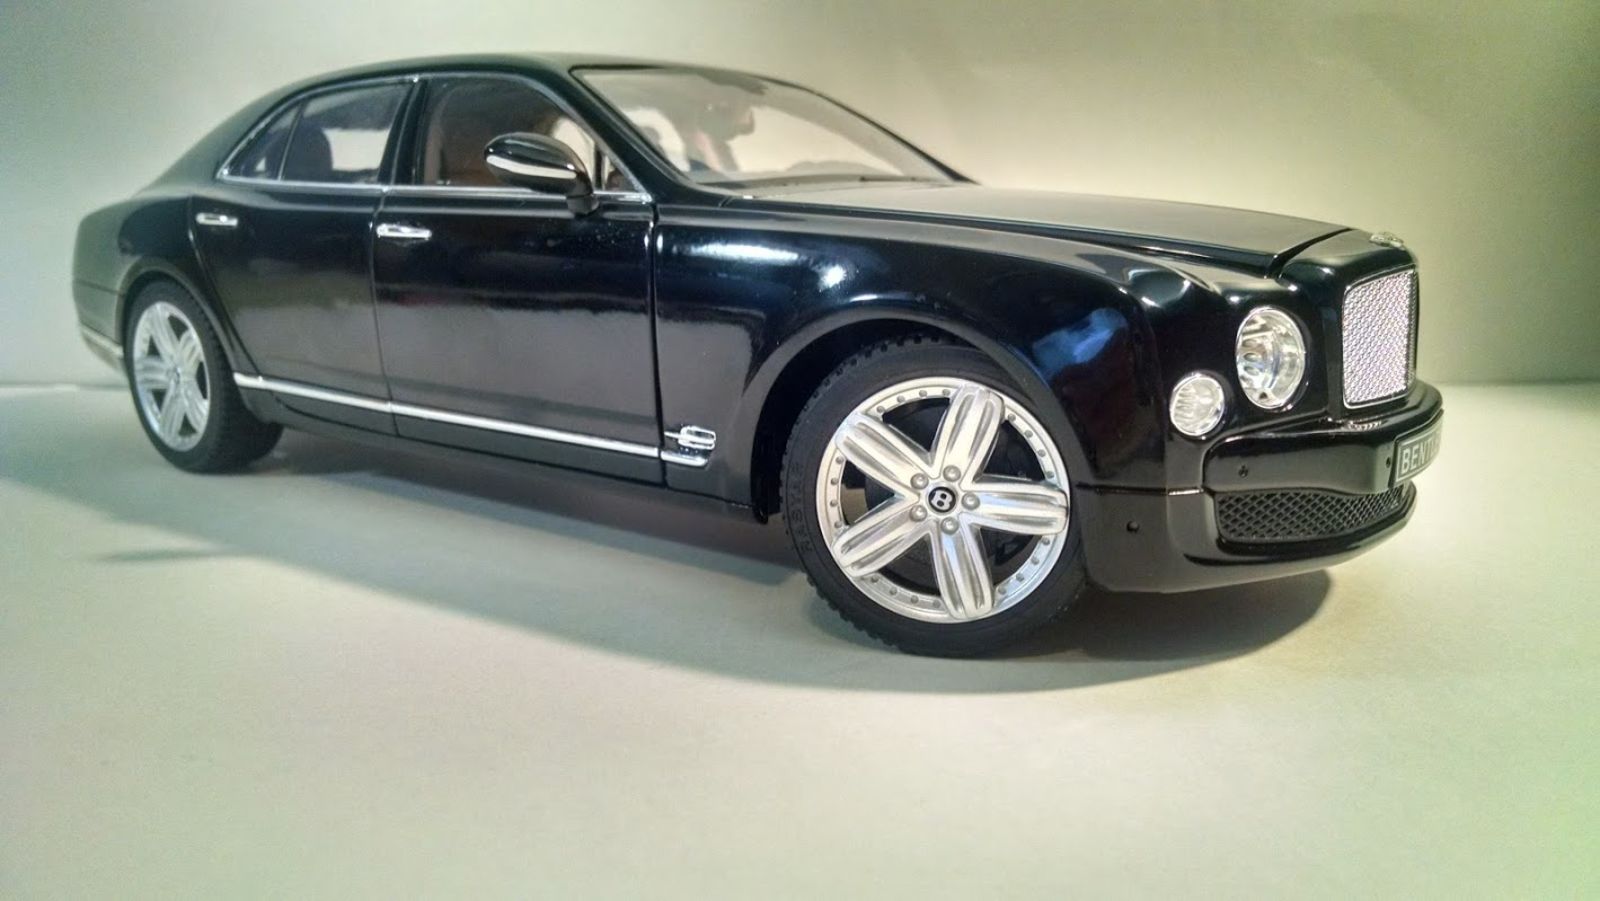 Illustration for article titled Bentley Mulsanne: Concours DModella